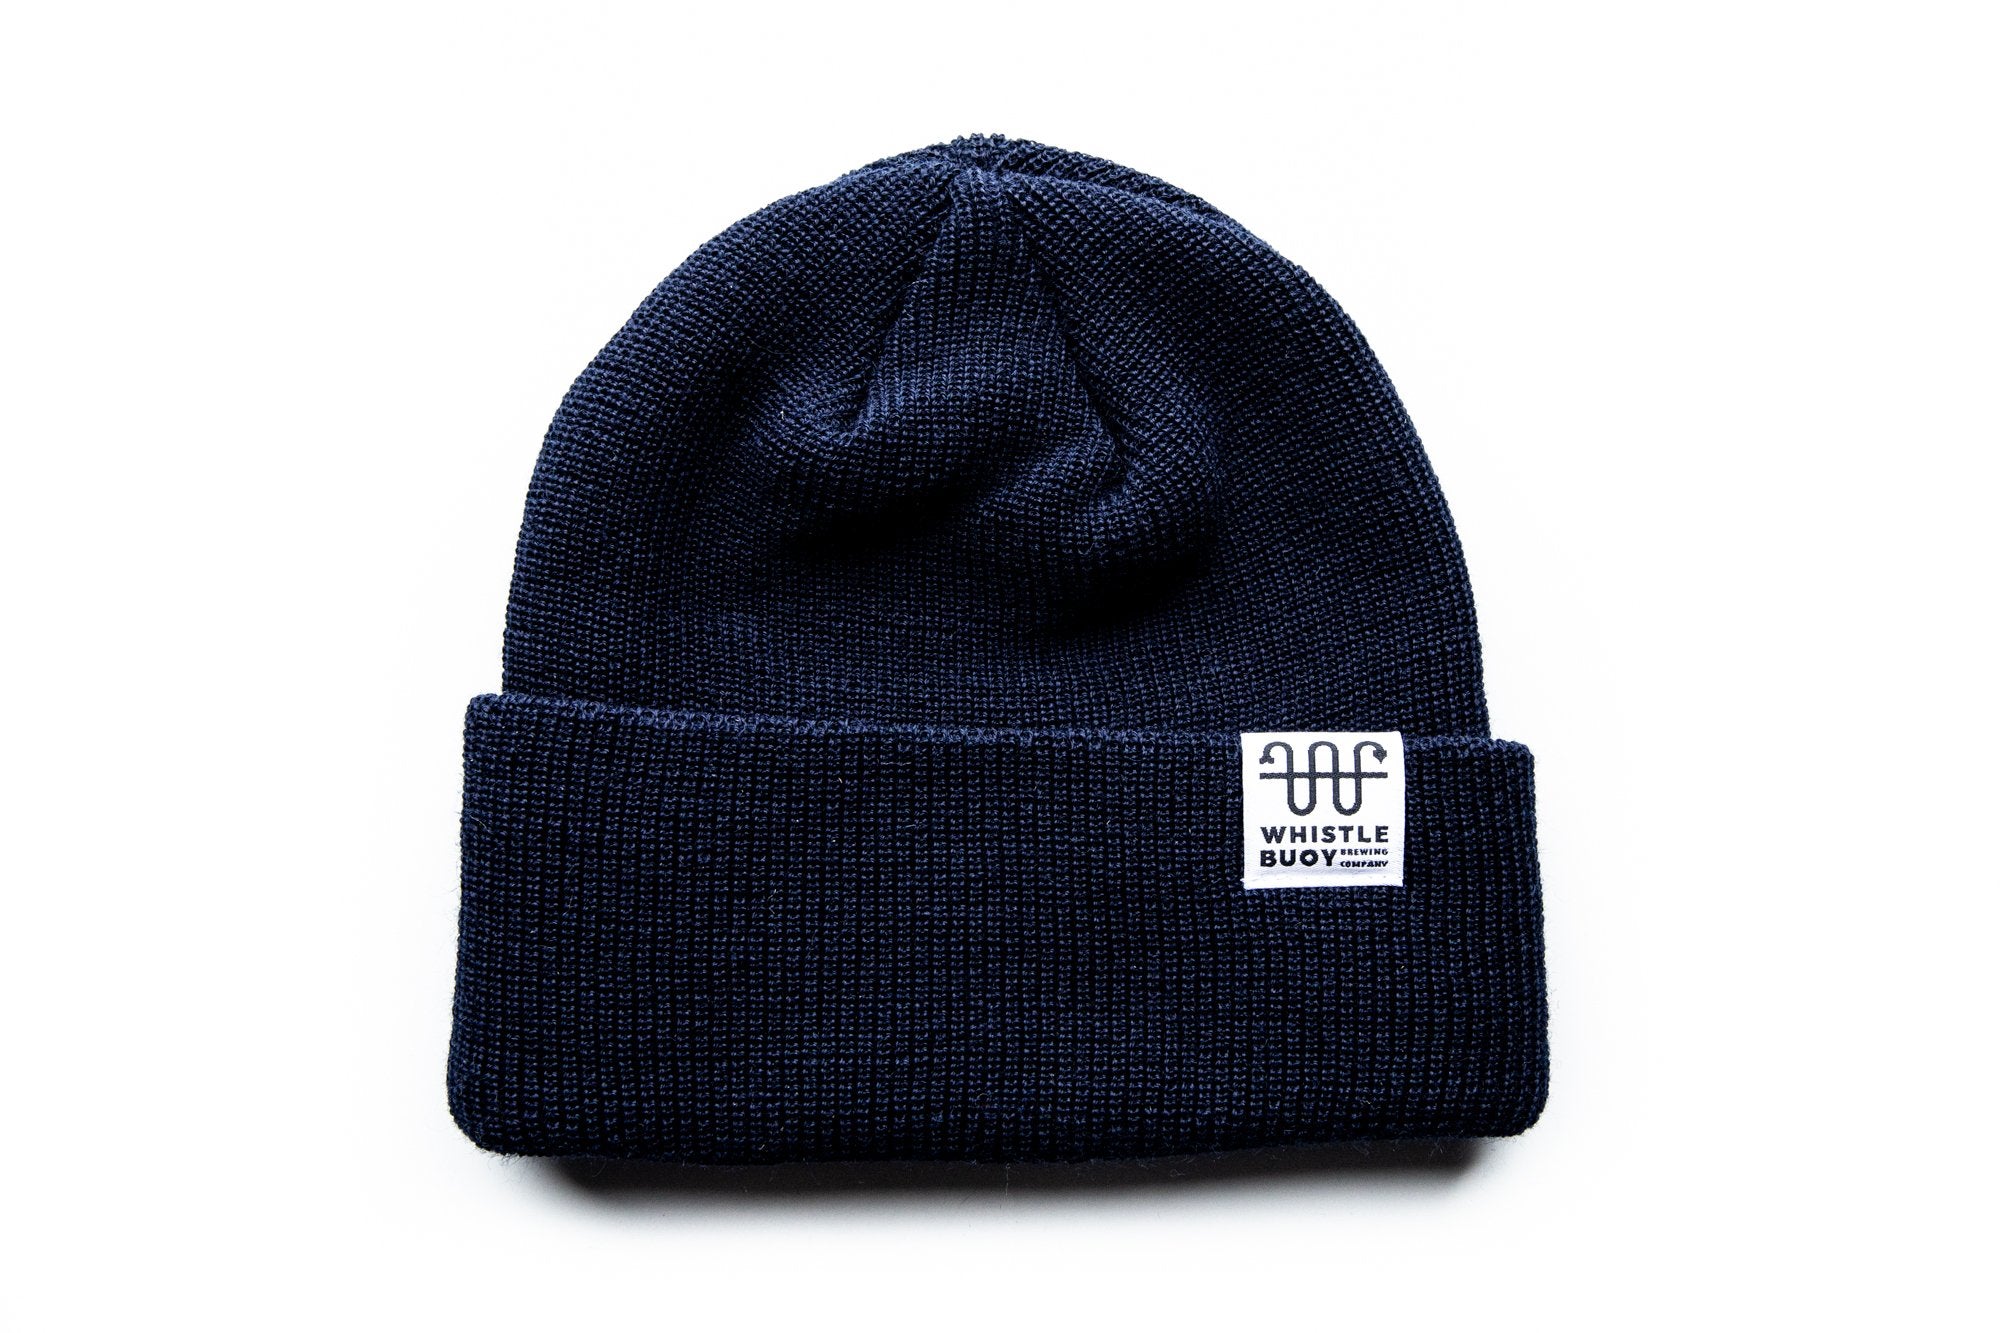 Whistle Buoy merino blend toque with white logo in blue